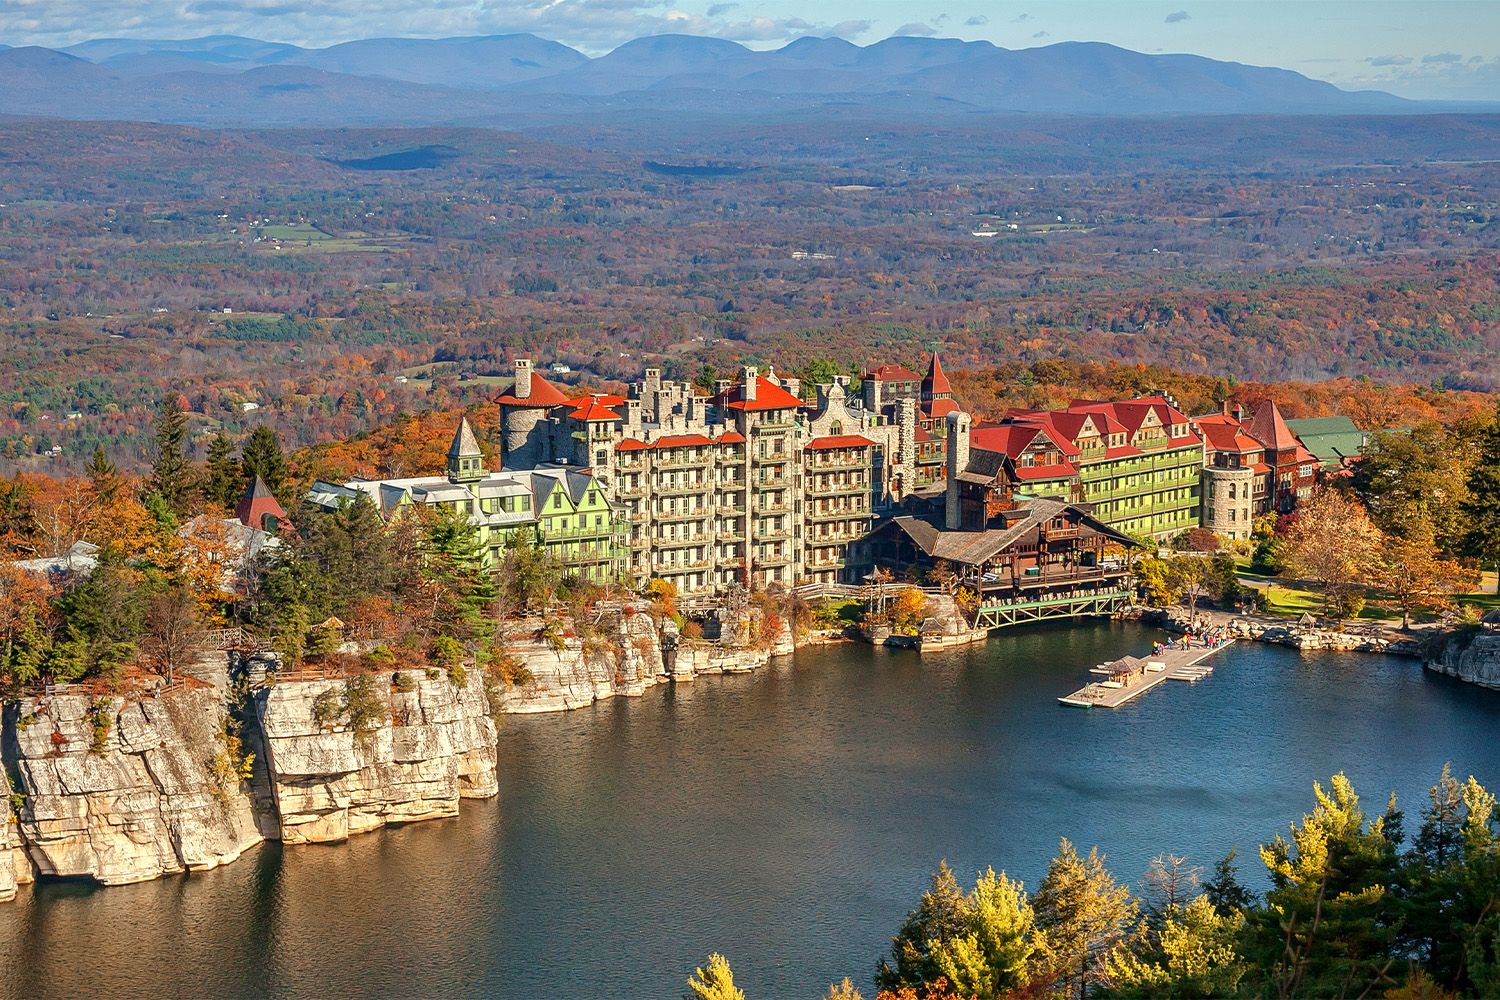 The exterior of the Mohonk Mountain Hotel